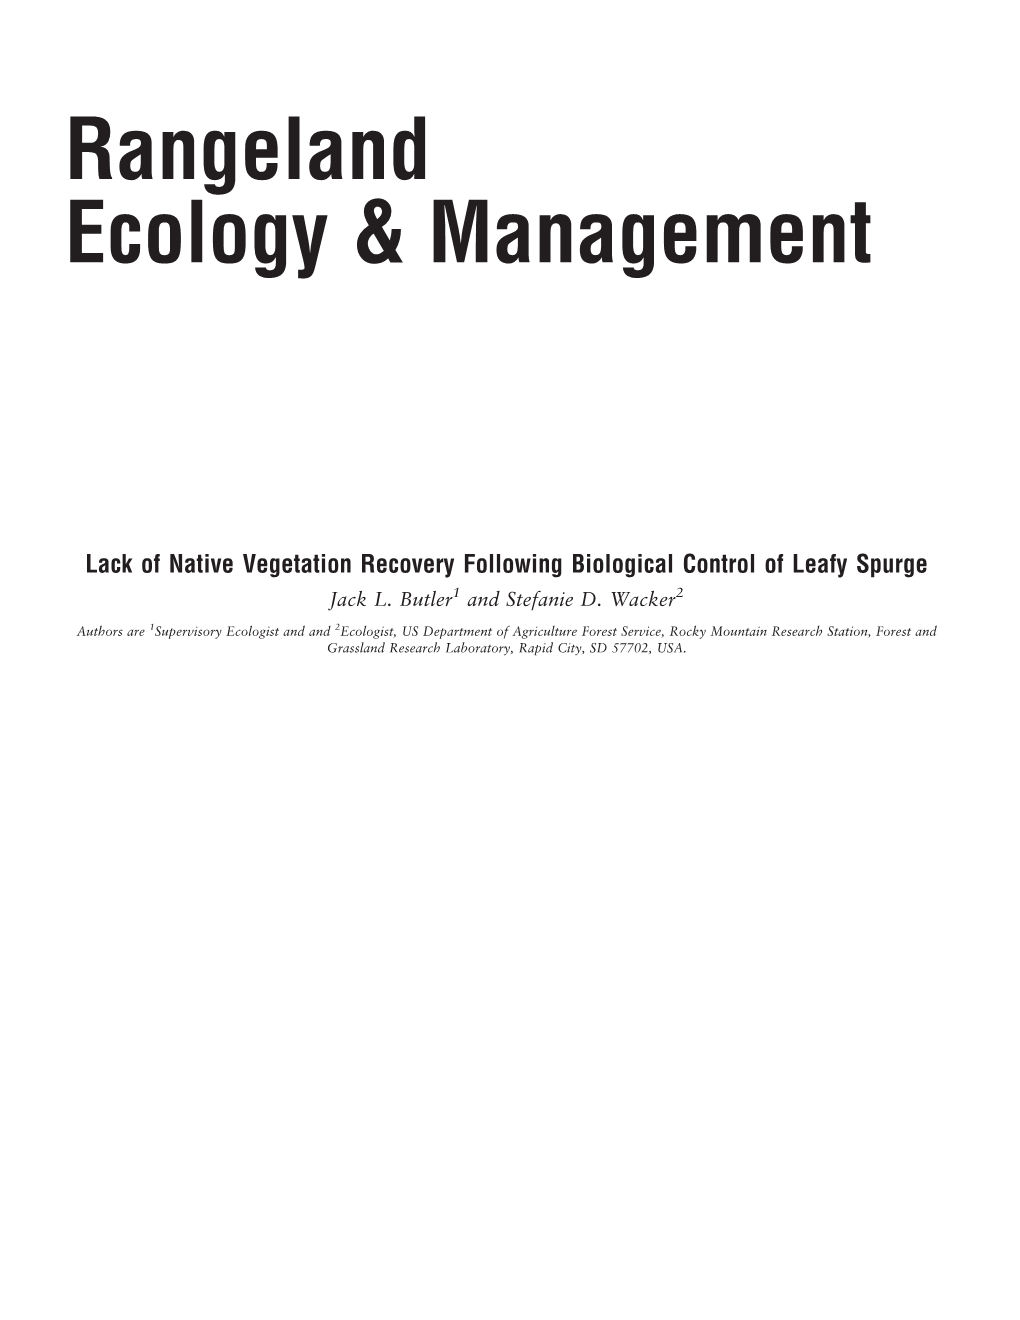 Lack of Native Vegetation Recovery Following Biological Control of Leafy Spurge Jack L